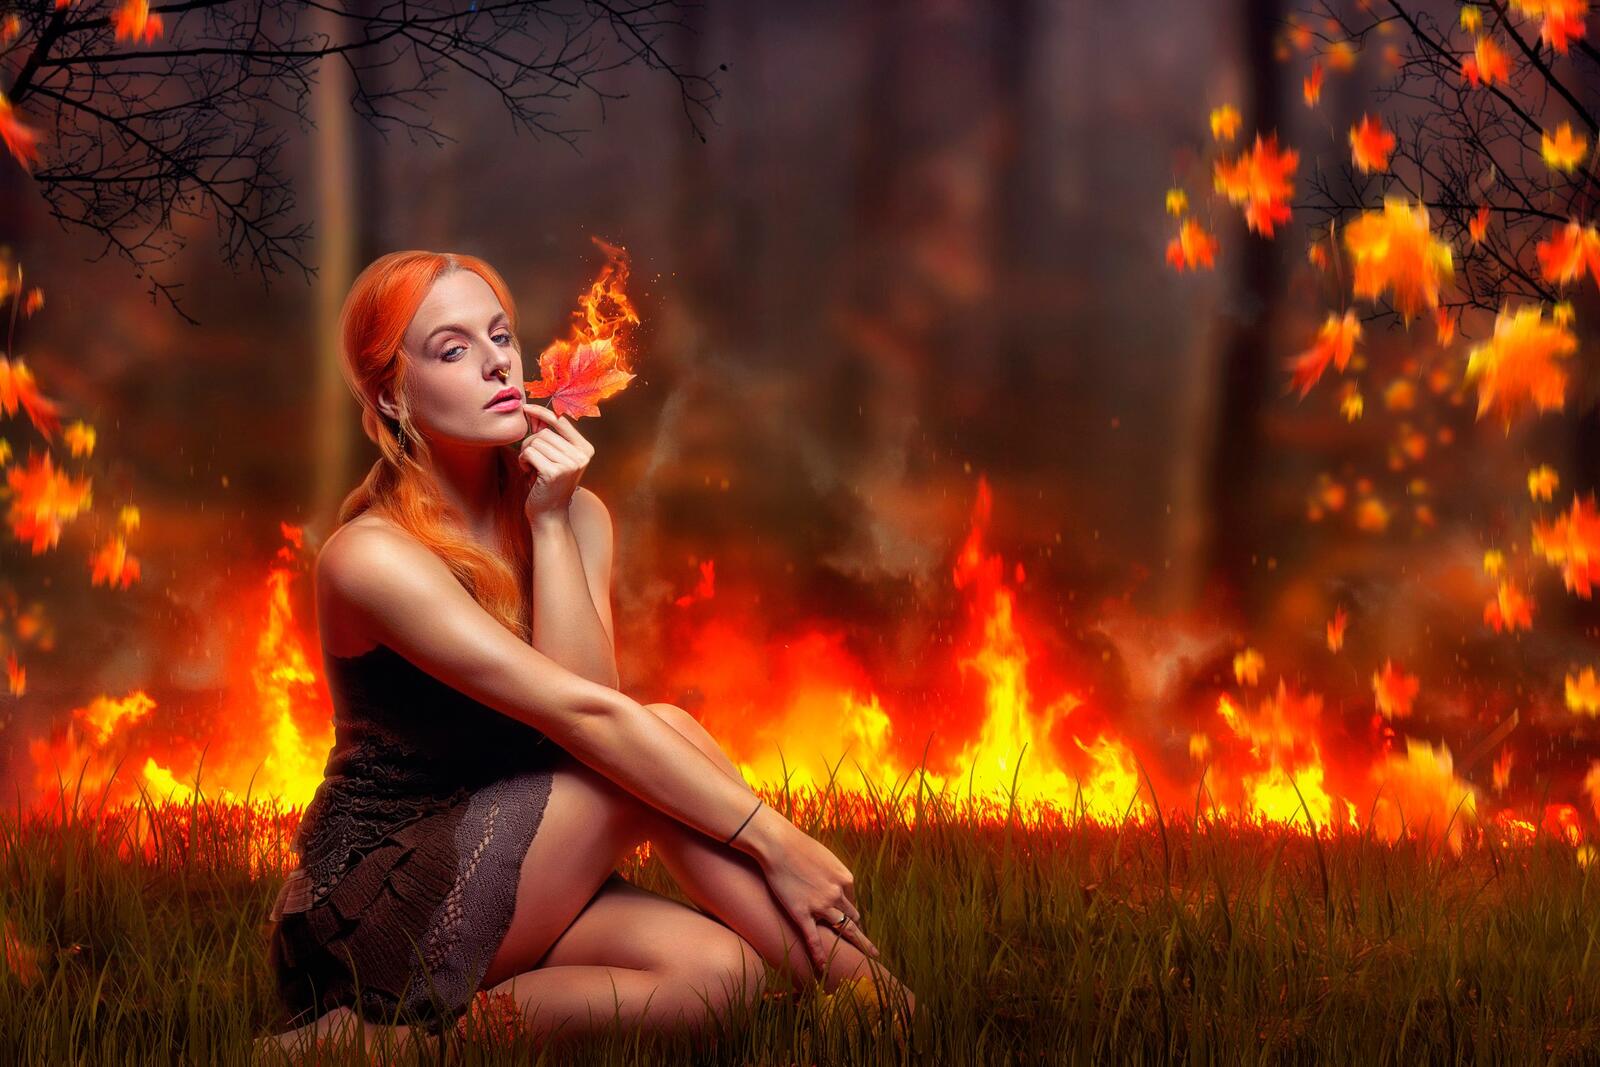 Free photo Rendering of a picture of a girl sitting on a burning lawn